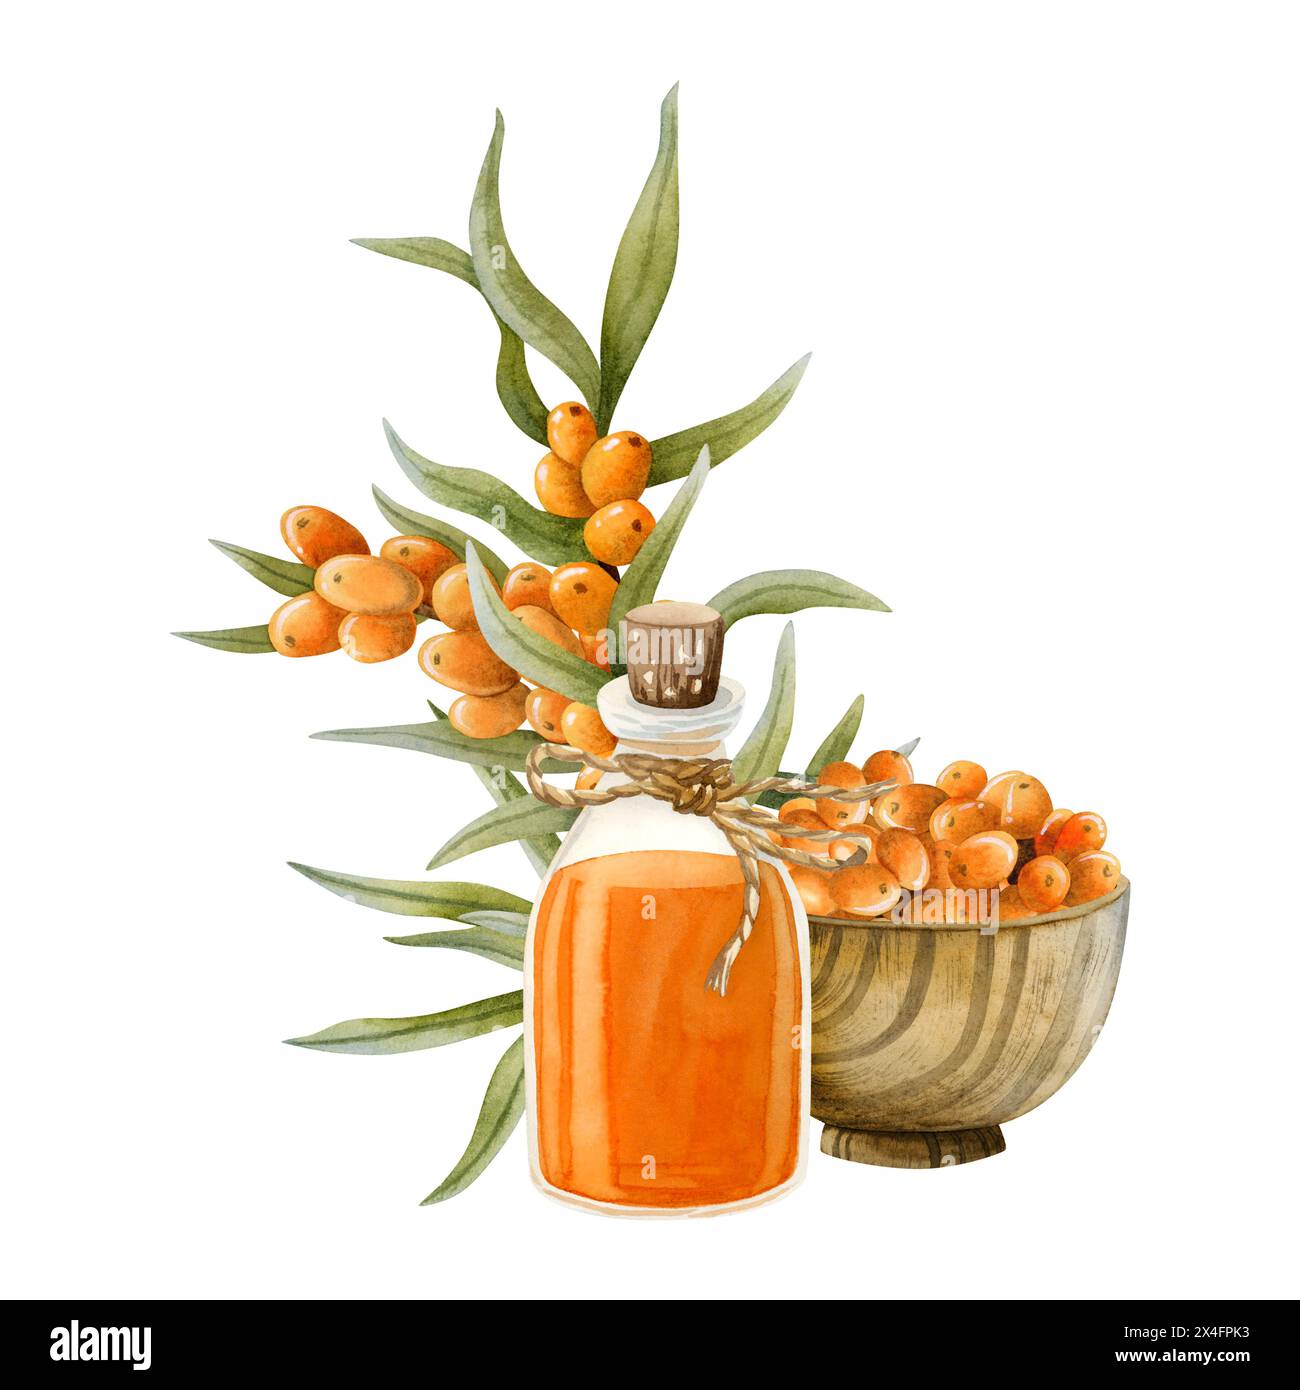 Watercolor sea buckthorn oil in glass bottle with seaberry branches and wooden bowl full of orange berries illustration Stock Photo